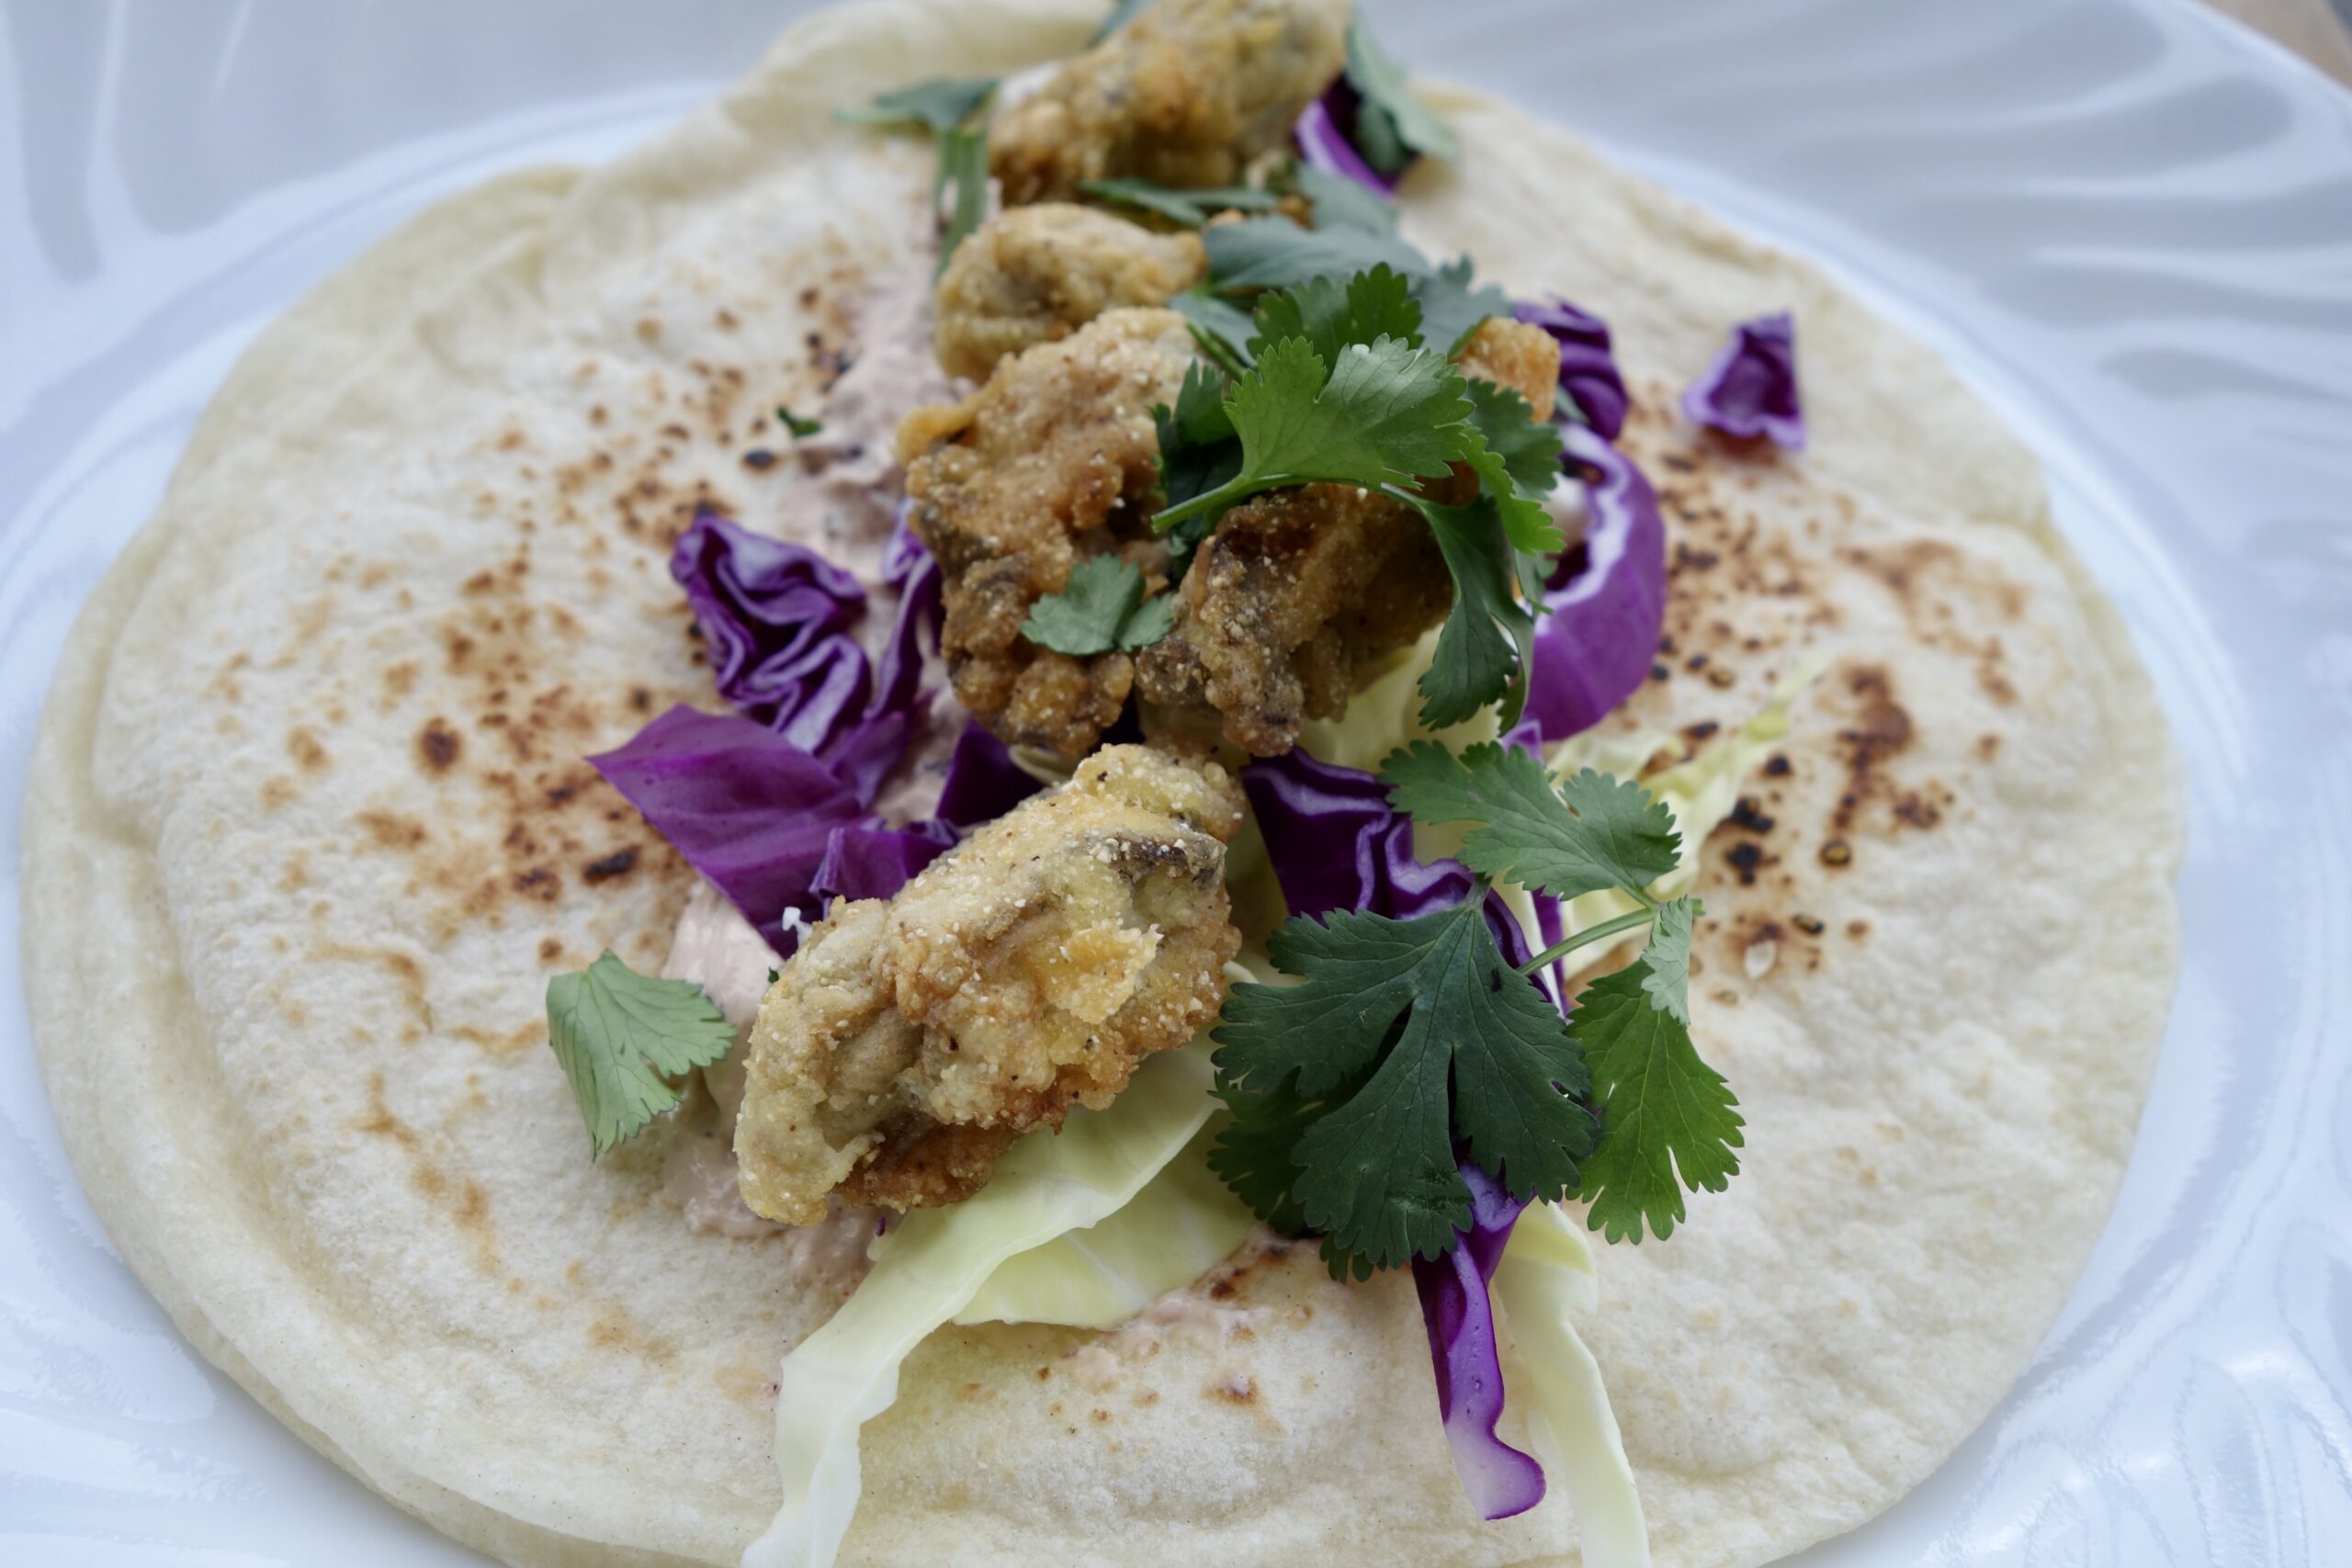 Oyster Tacos with Chipotle Sauce